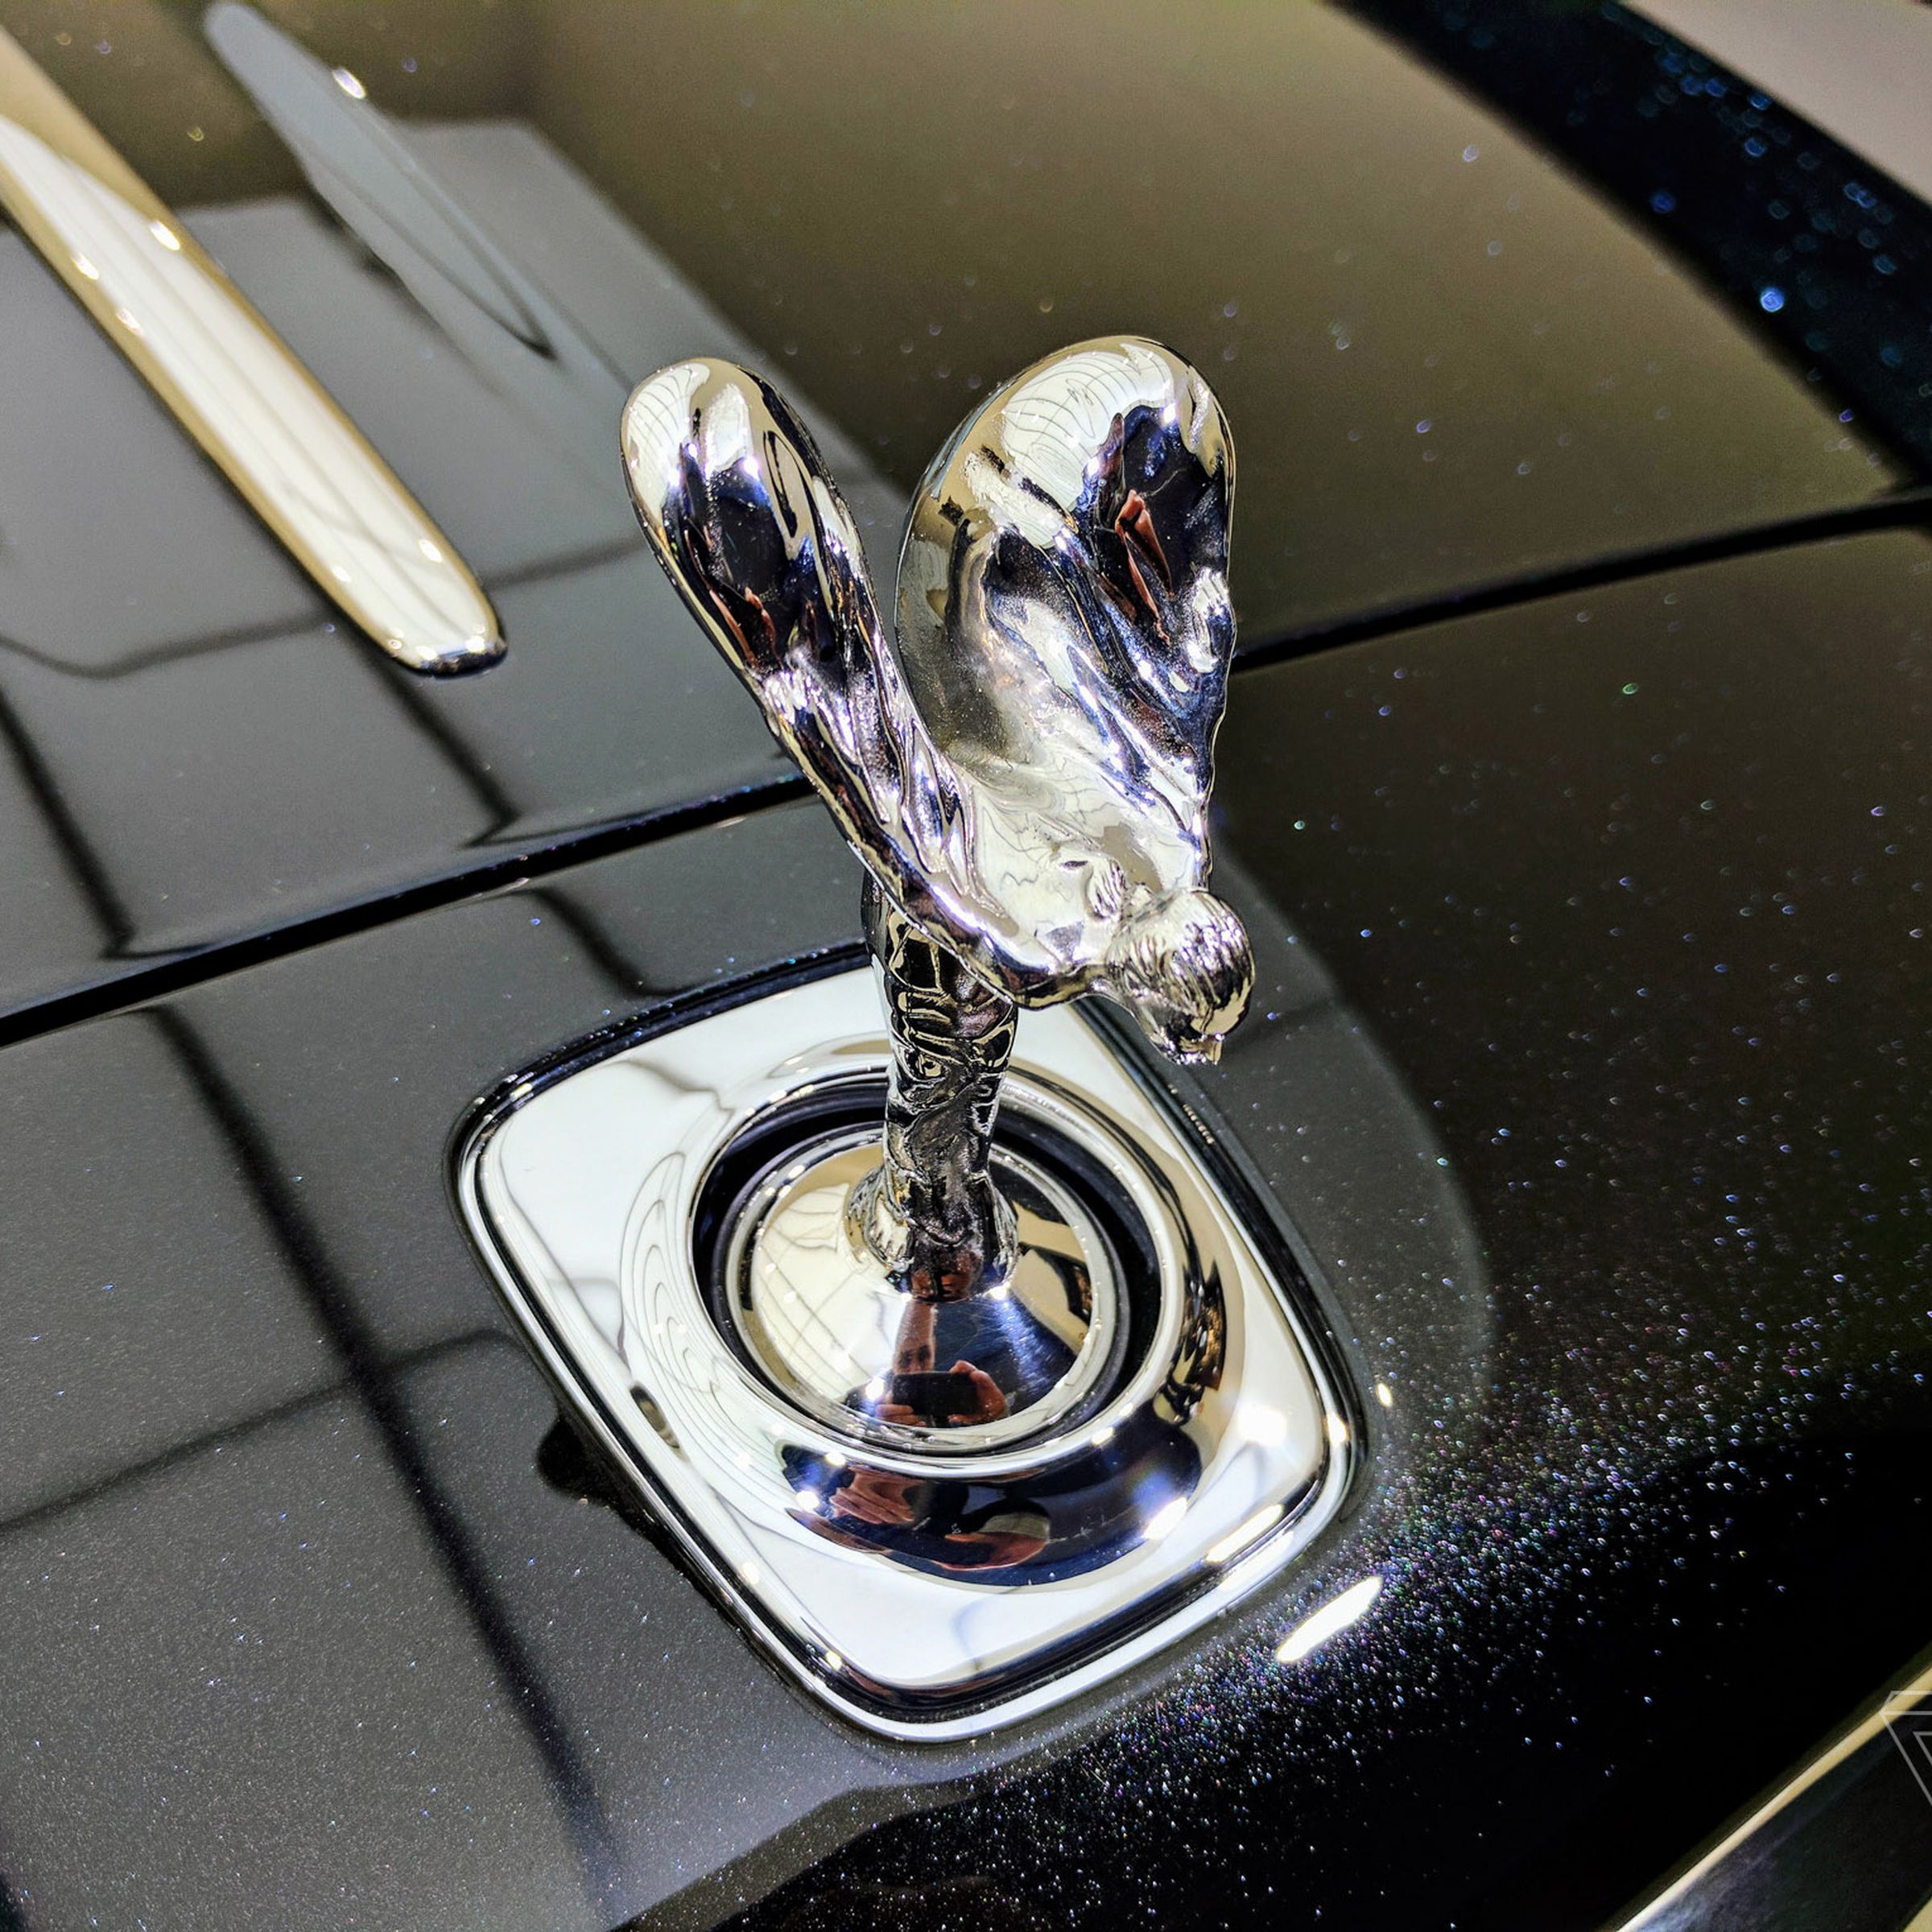 Rolls-Royce Ghost with diamond dust in the paint